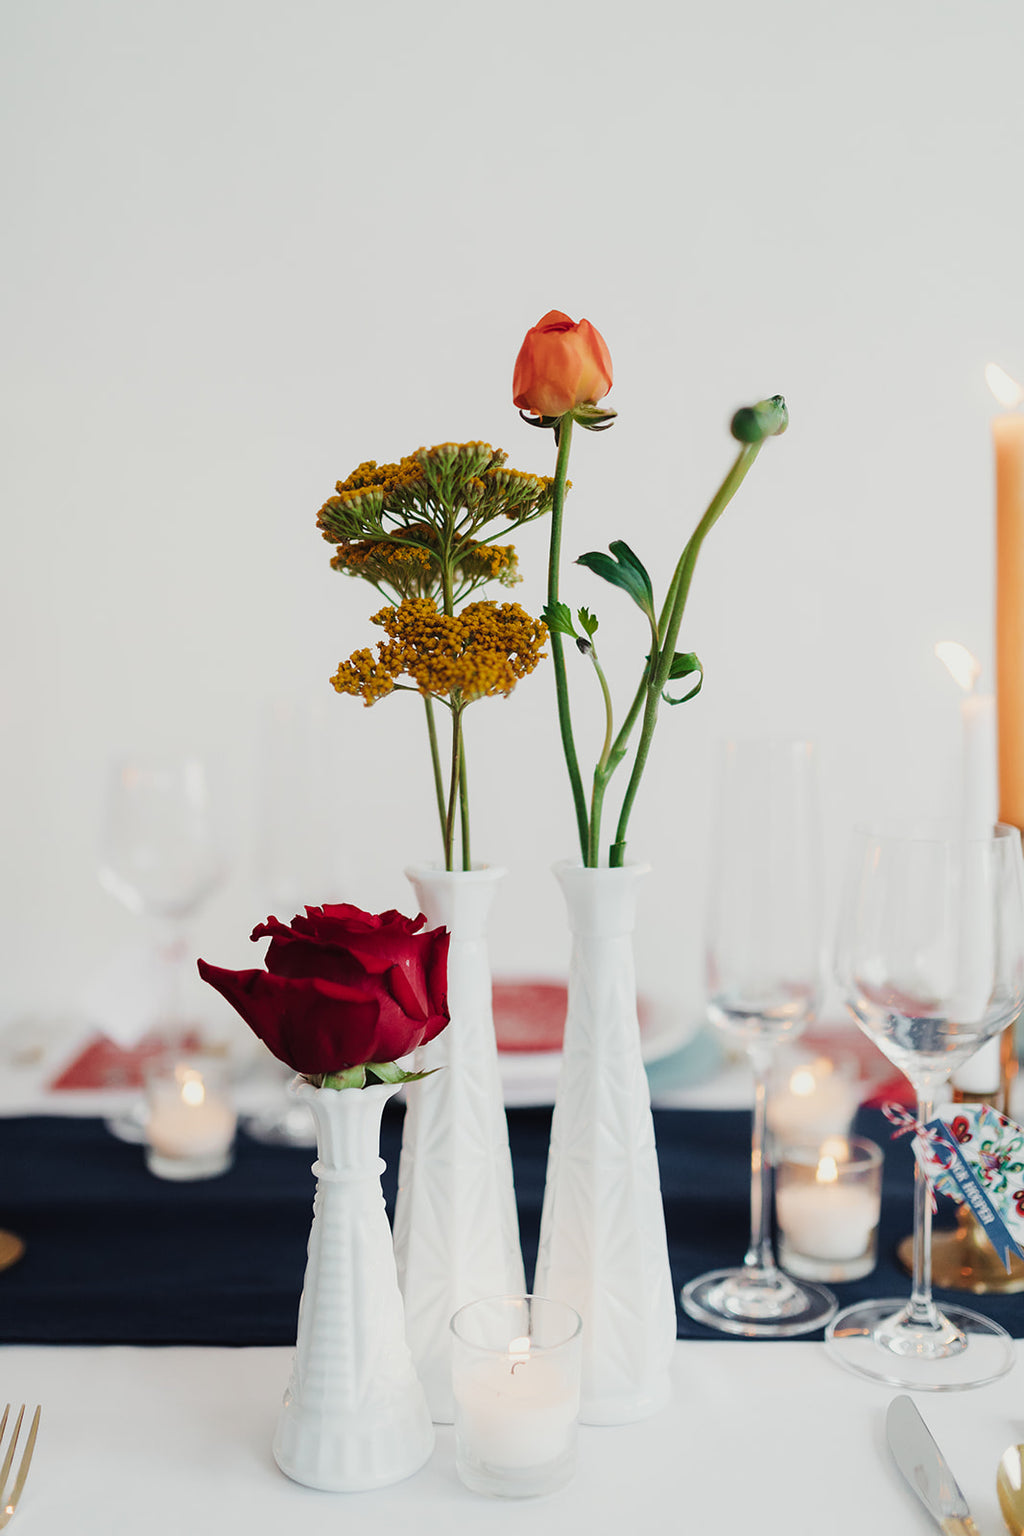 White milk glass vases with florals as centerpieces